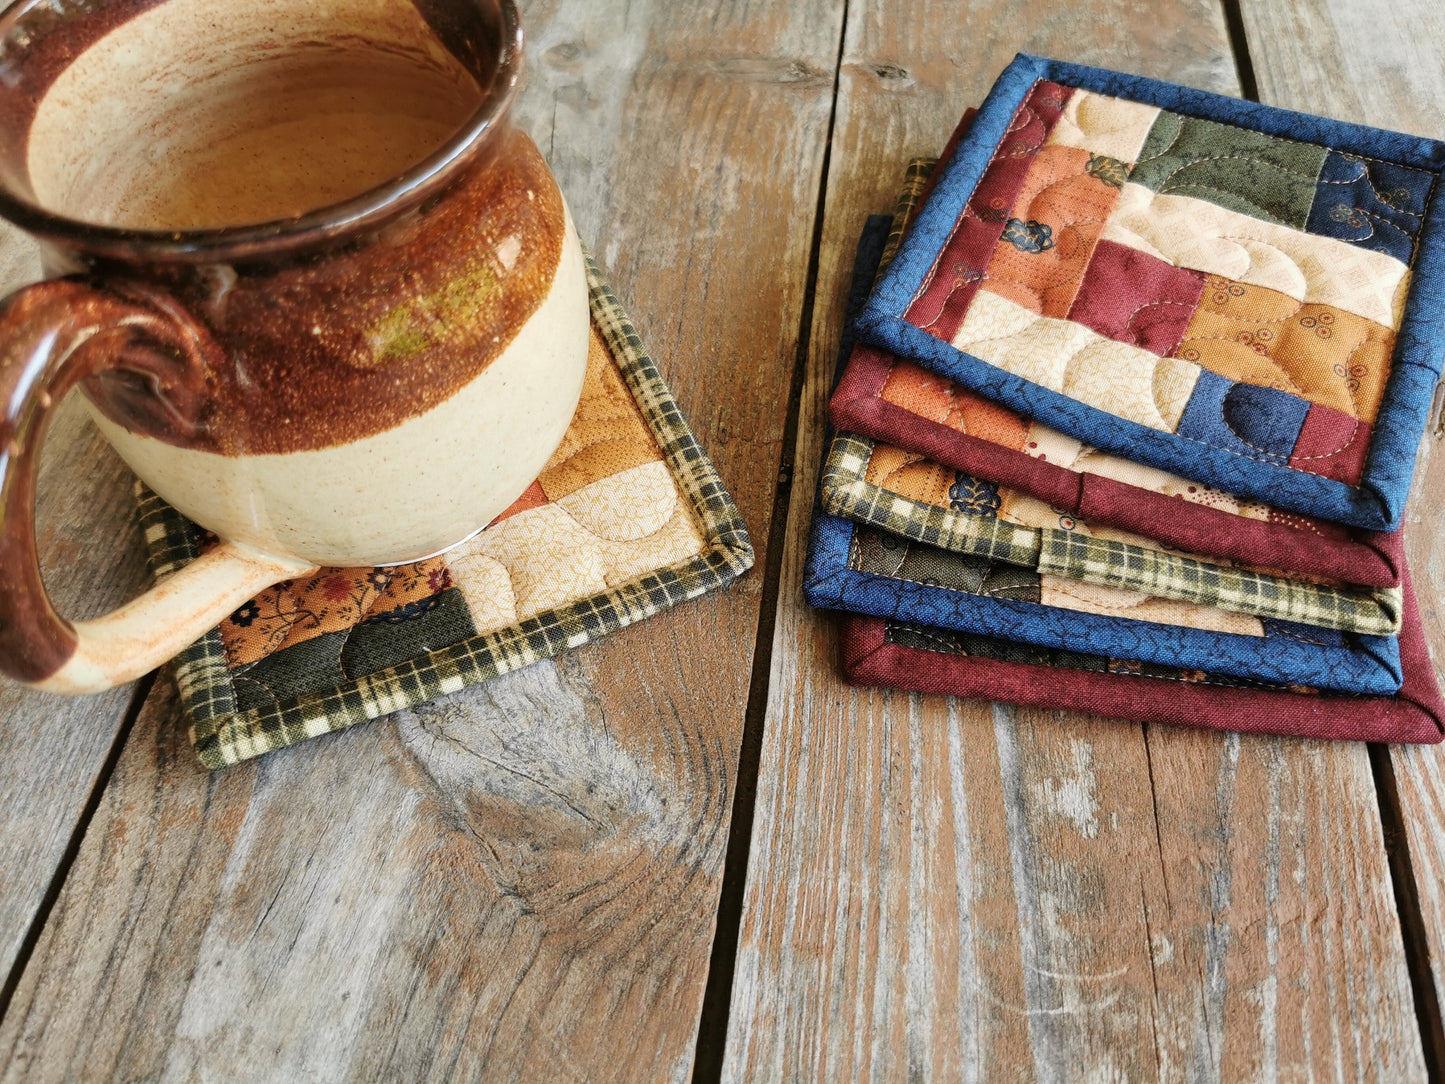 These rustic coasters fit large mugs. The scrappy patchwork style means each one is different but still coordinating.